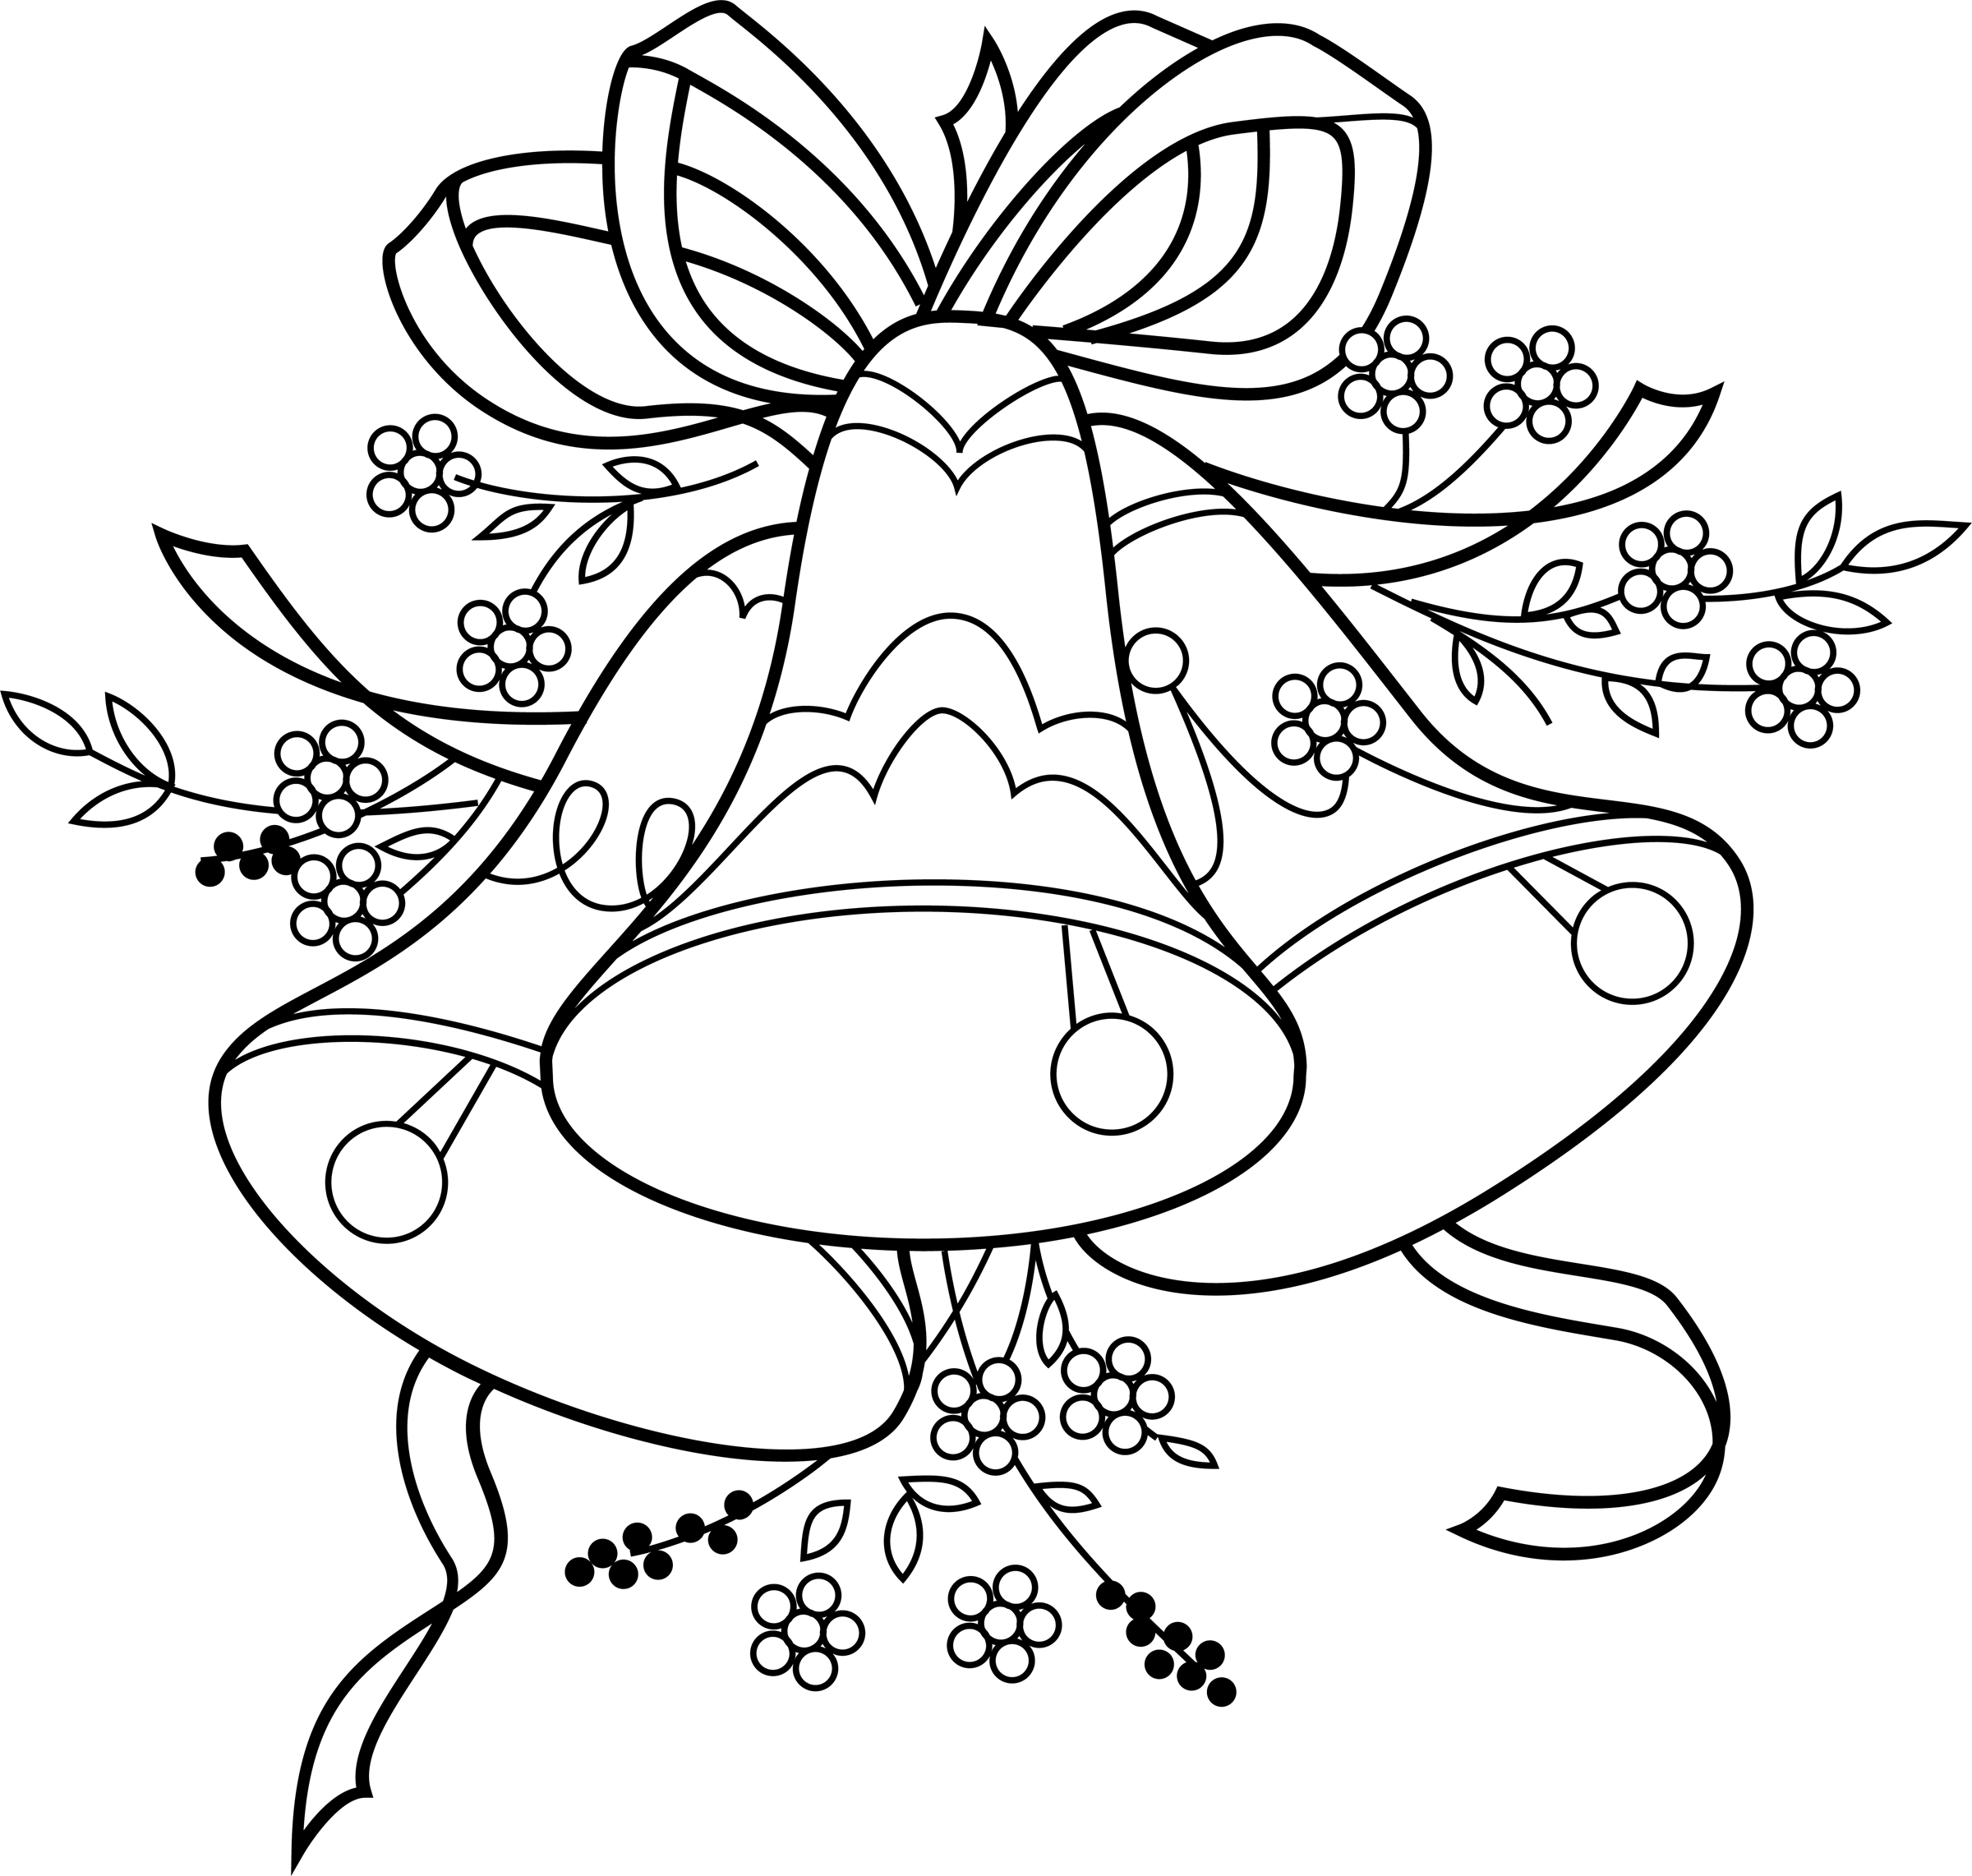 wedding bells clipart black and white free - photo #20